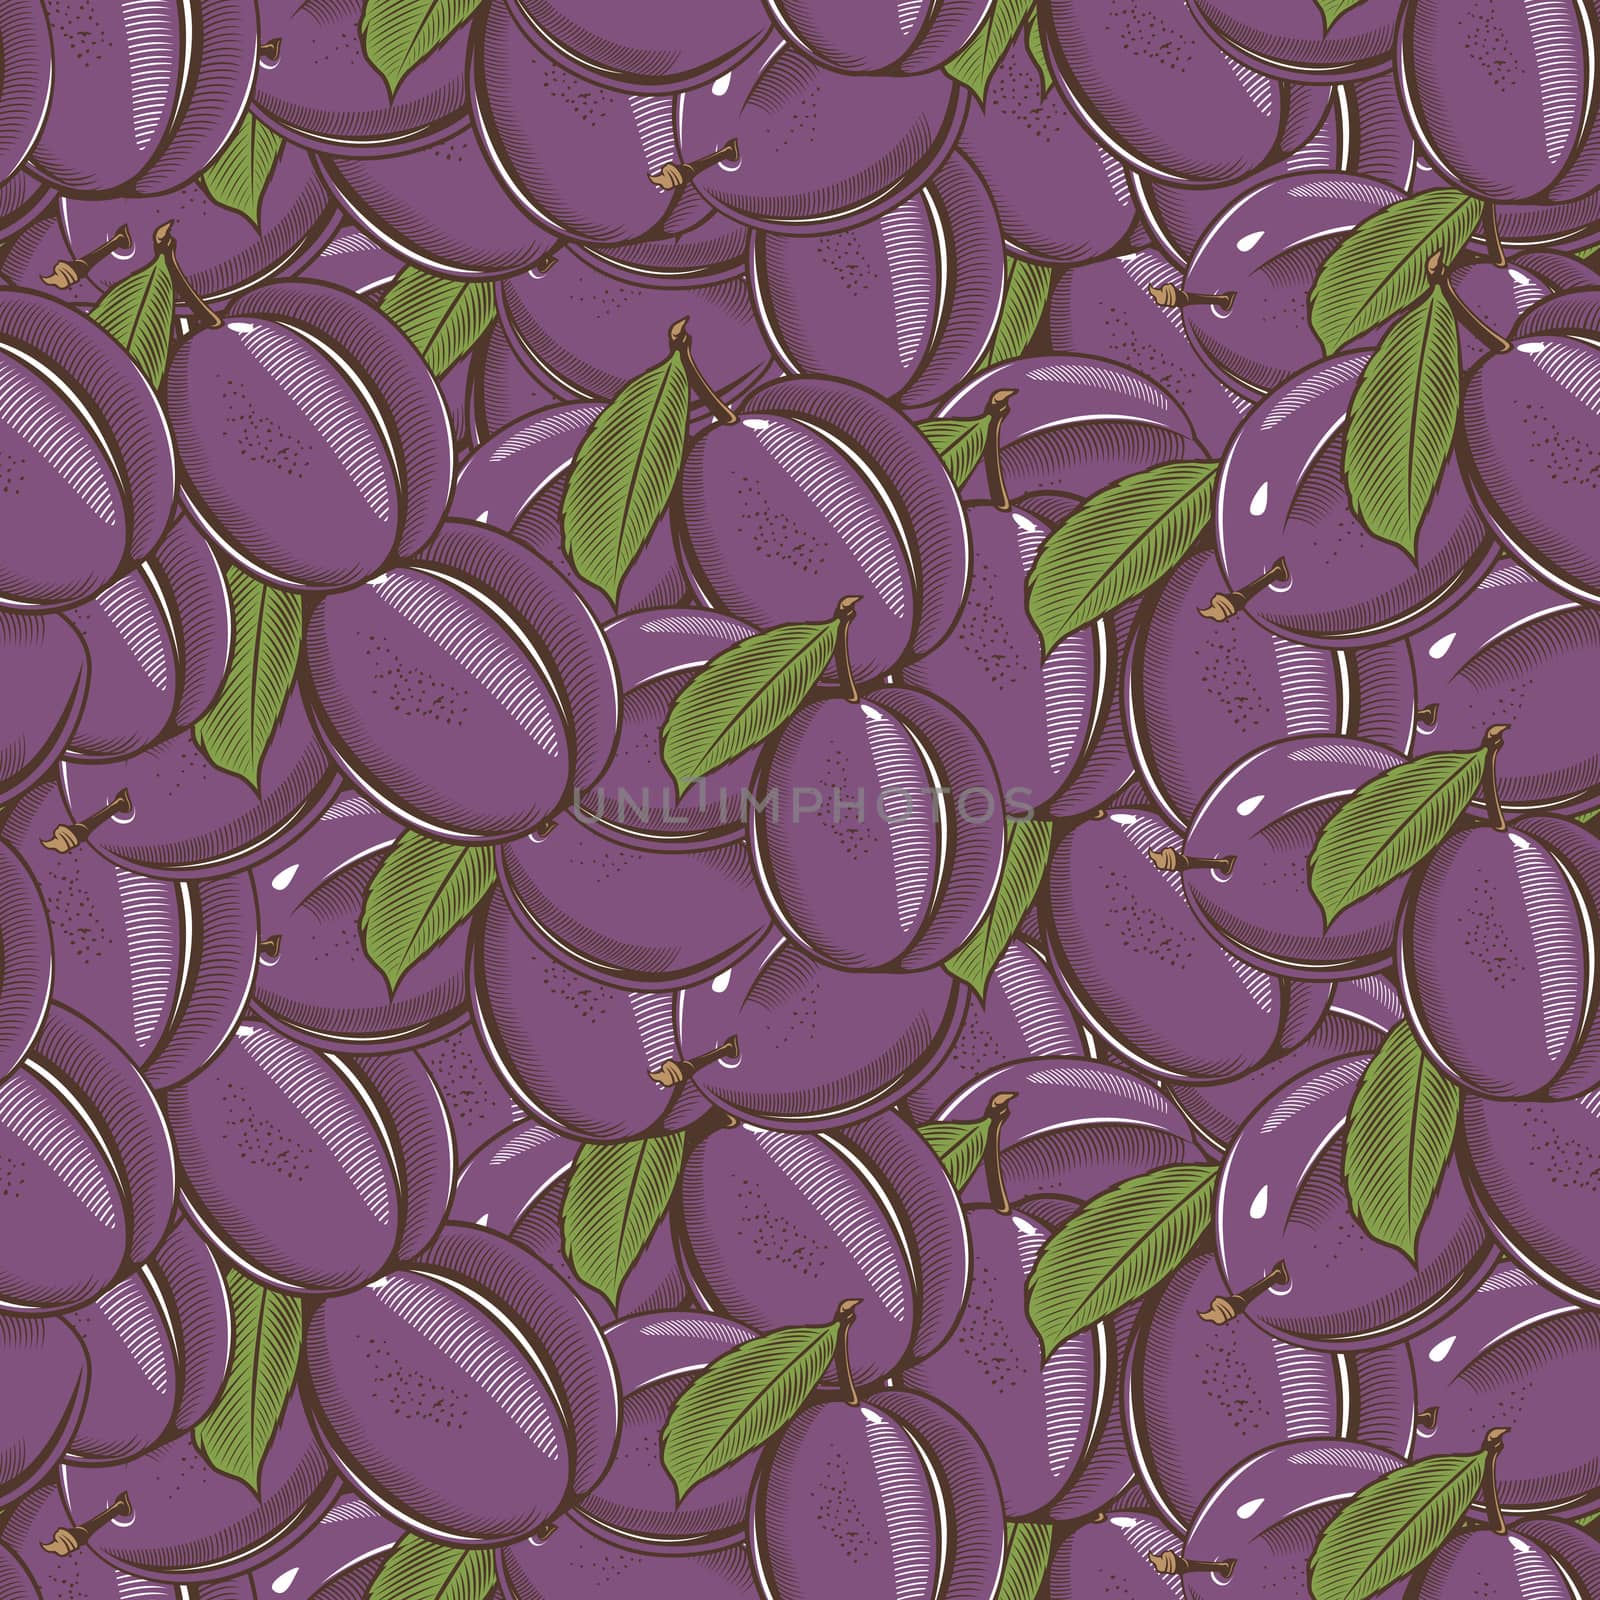 Vintage Plum Seamless Pattern by ConceptCafe